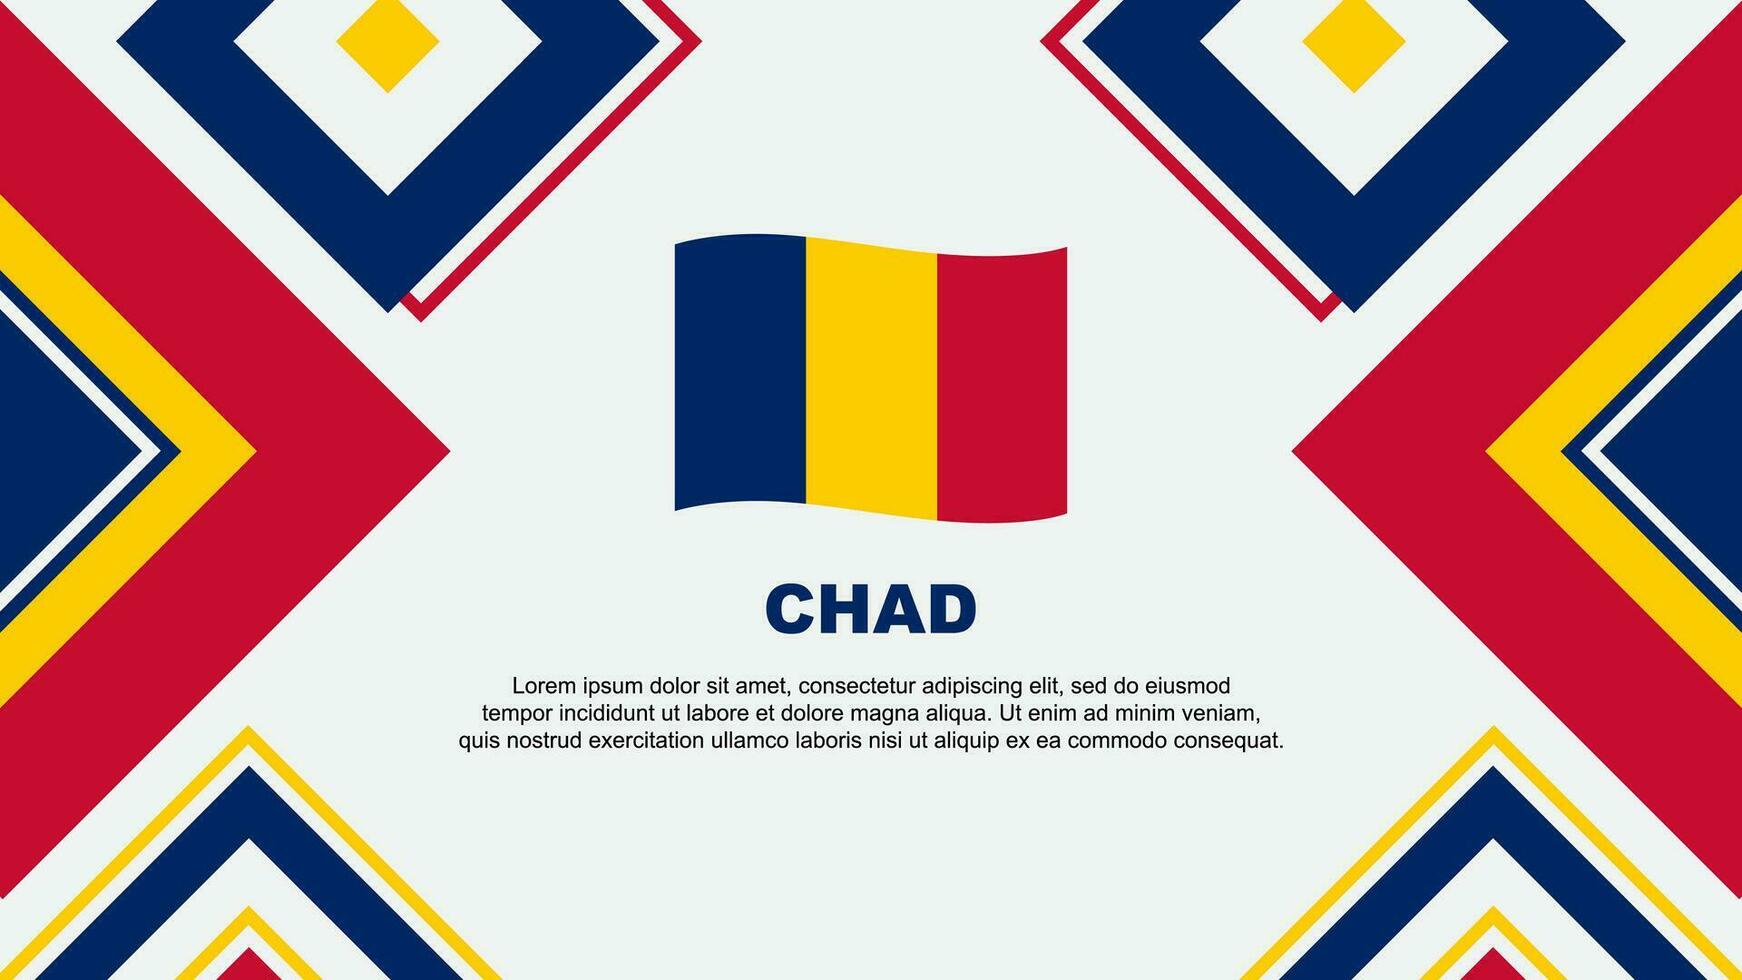 Chad Flag Abstract Background Design Template. Chad Independence Day Banner Wallpaper Vector Illustration. Chad Independence Day